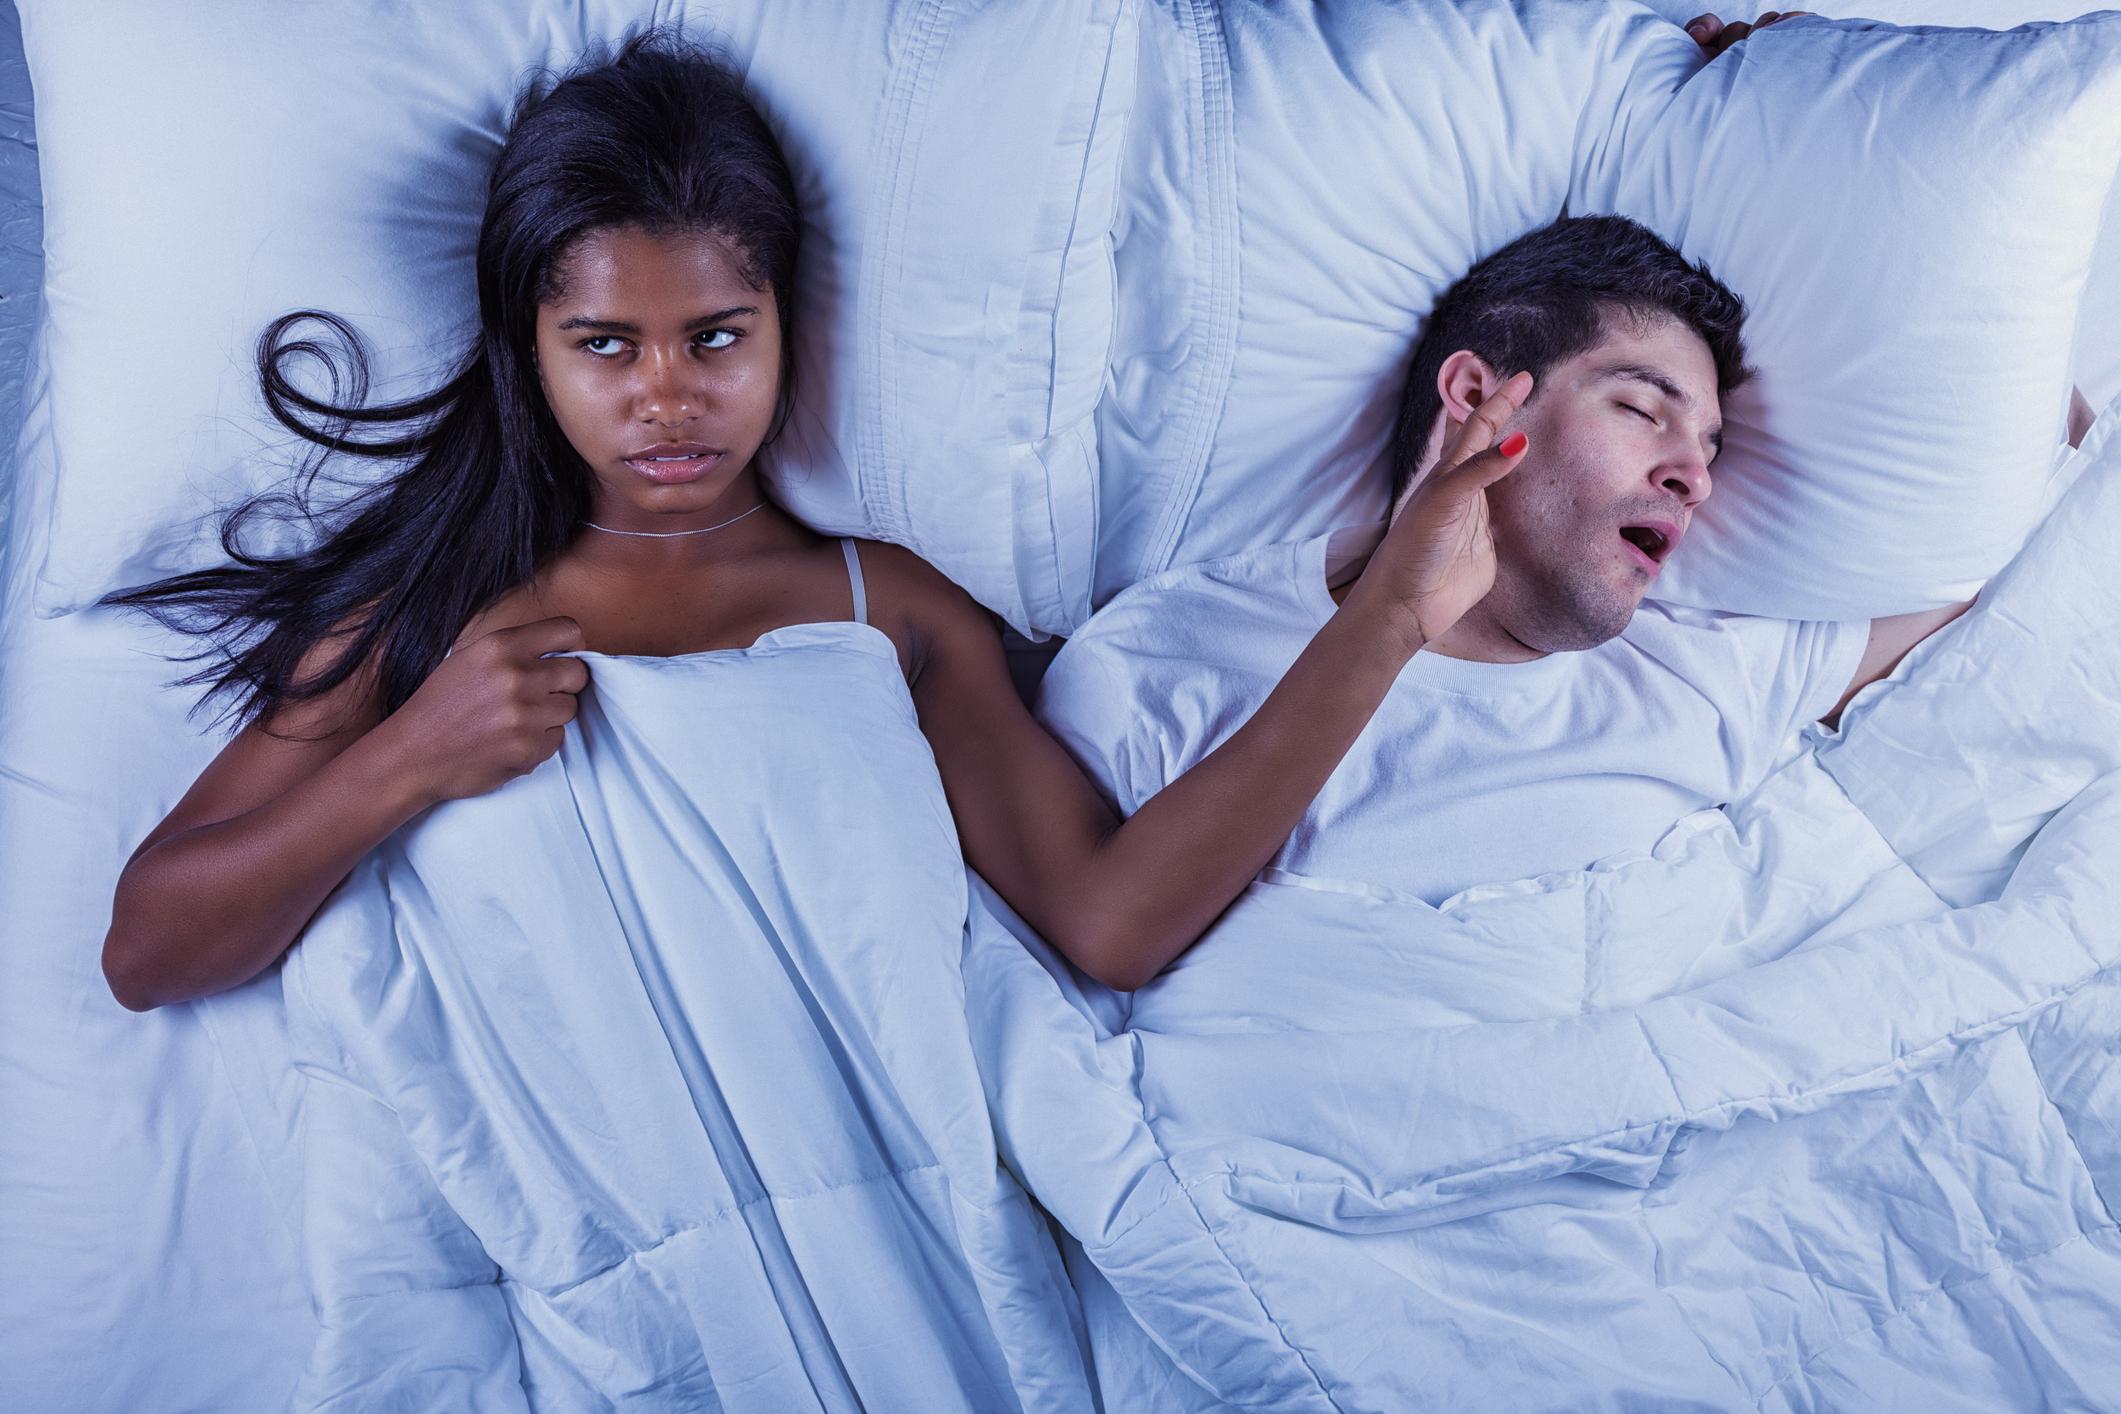 Women who deal with insomnia are more likely than average to also suffer from sex problems